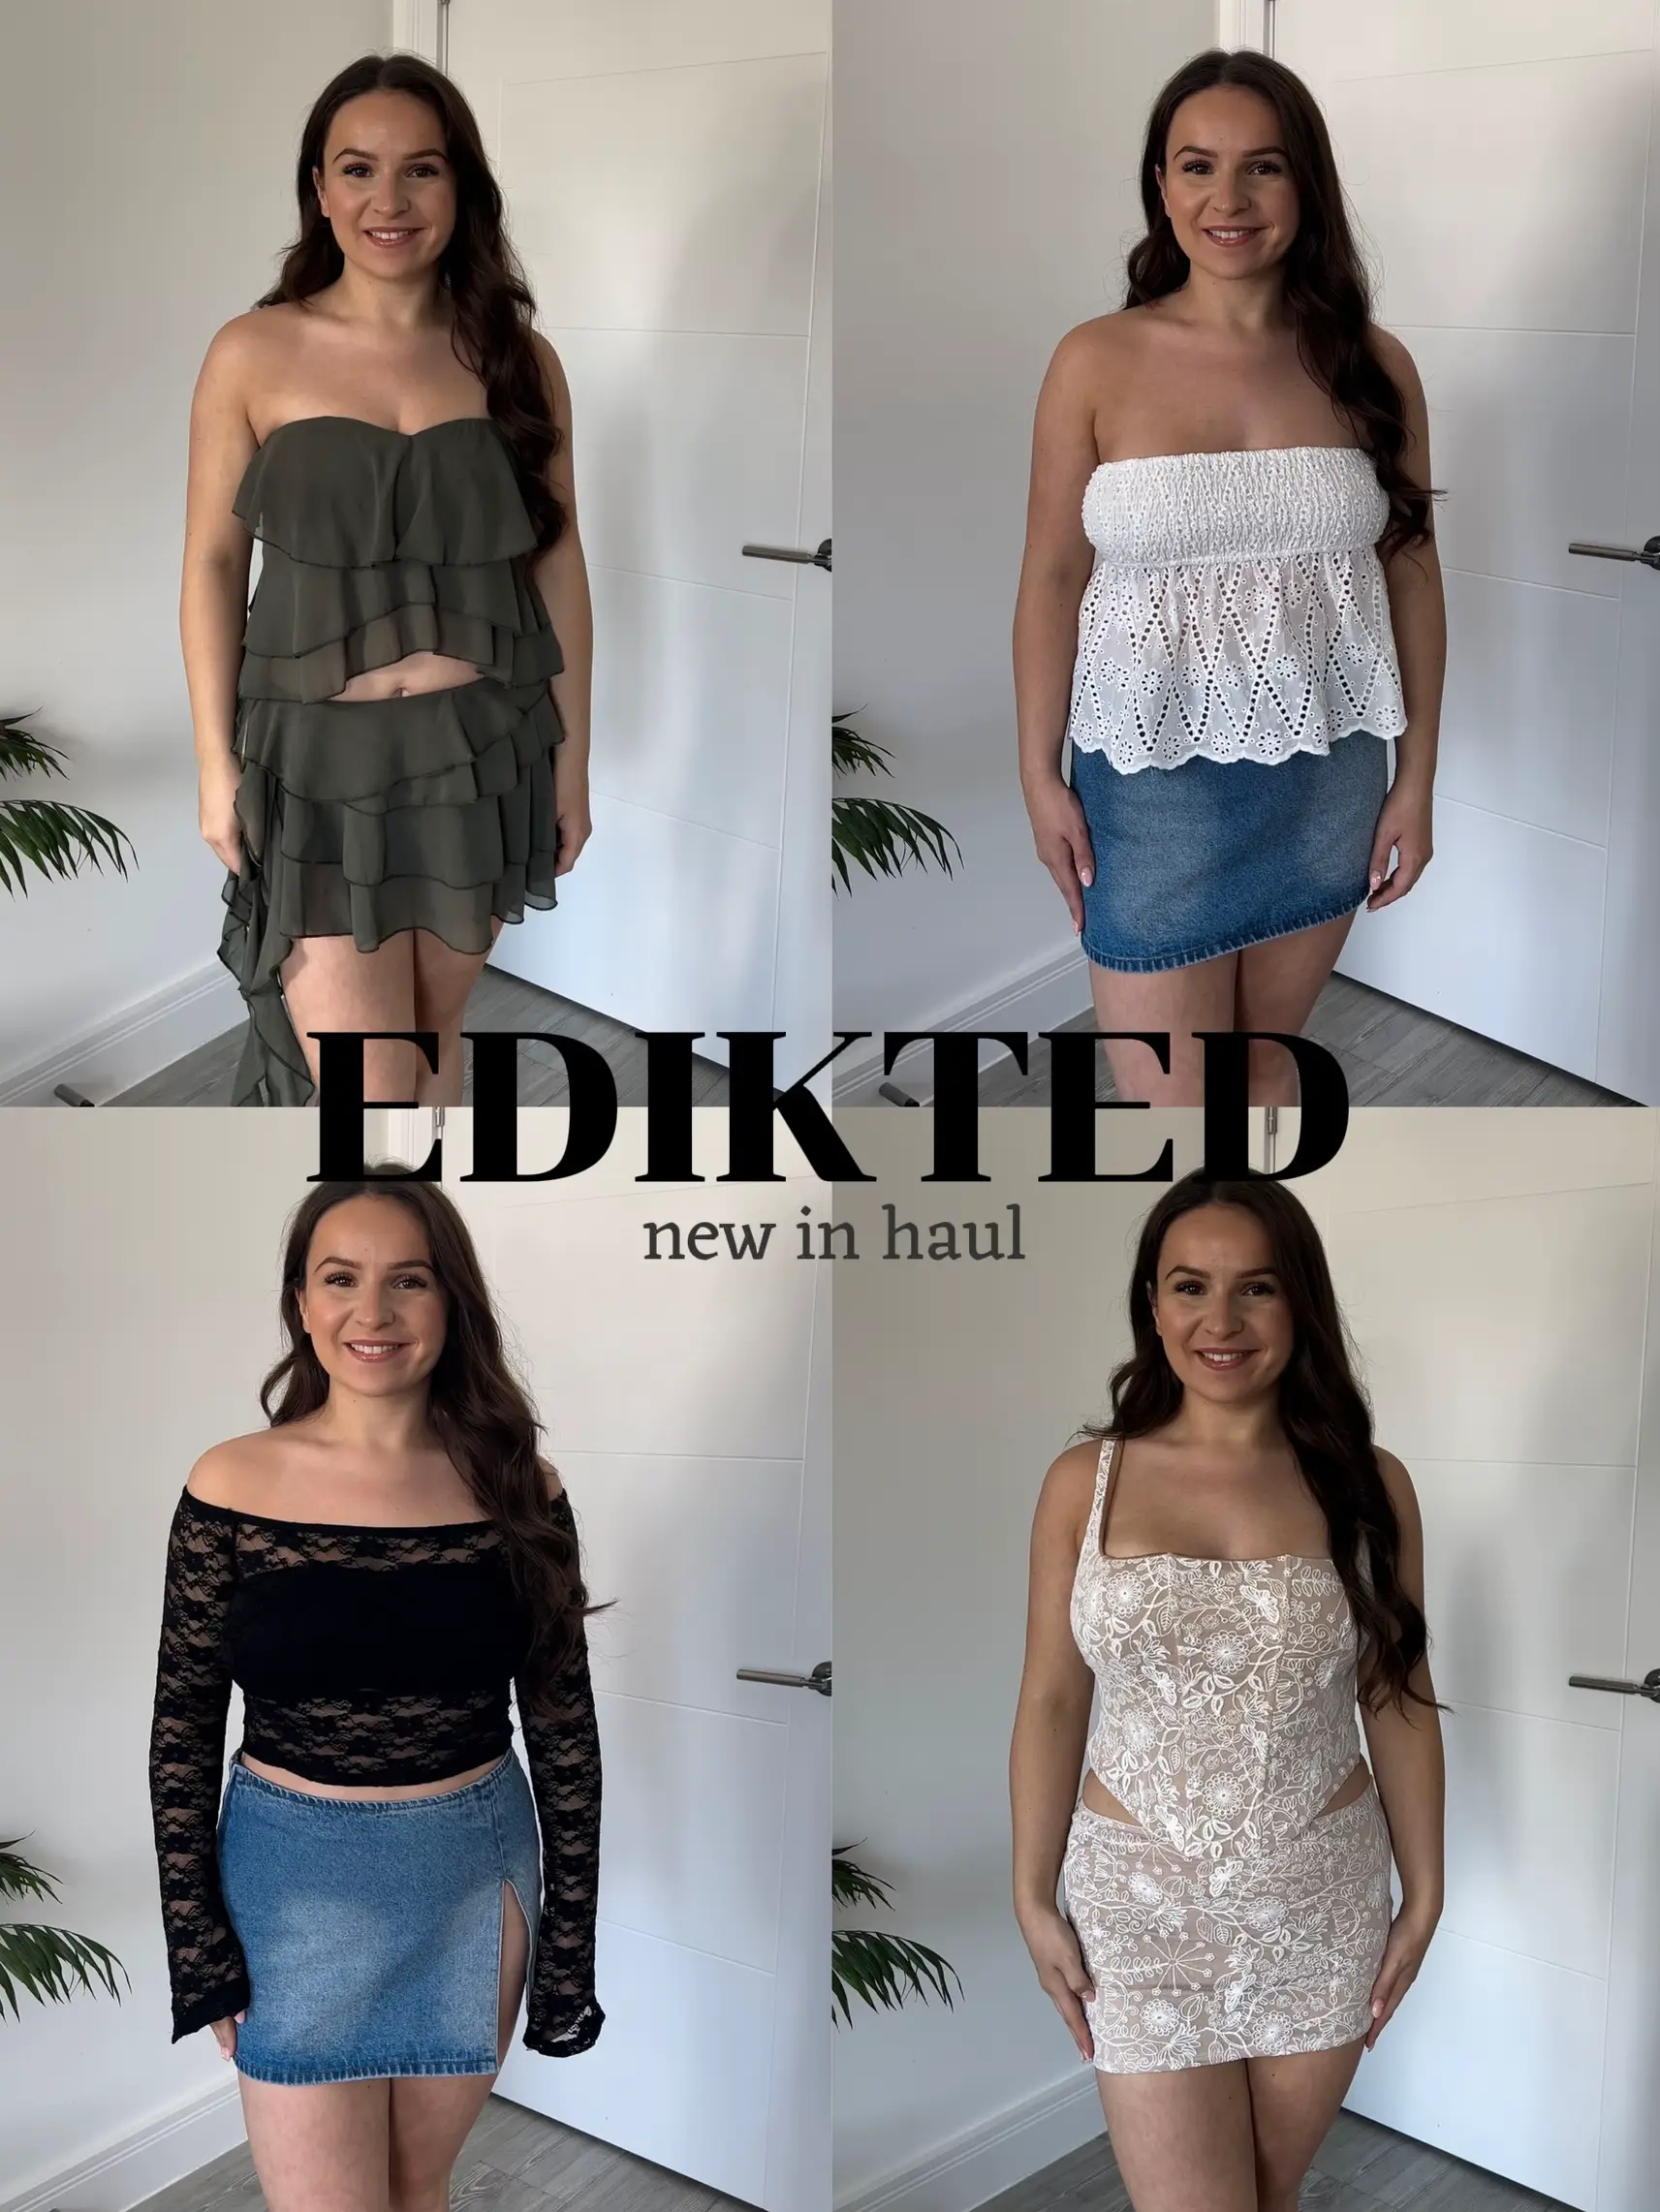 summer new in at edikted haul 🫶🏽, Gallery posted by mollyolivia__x